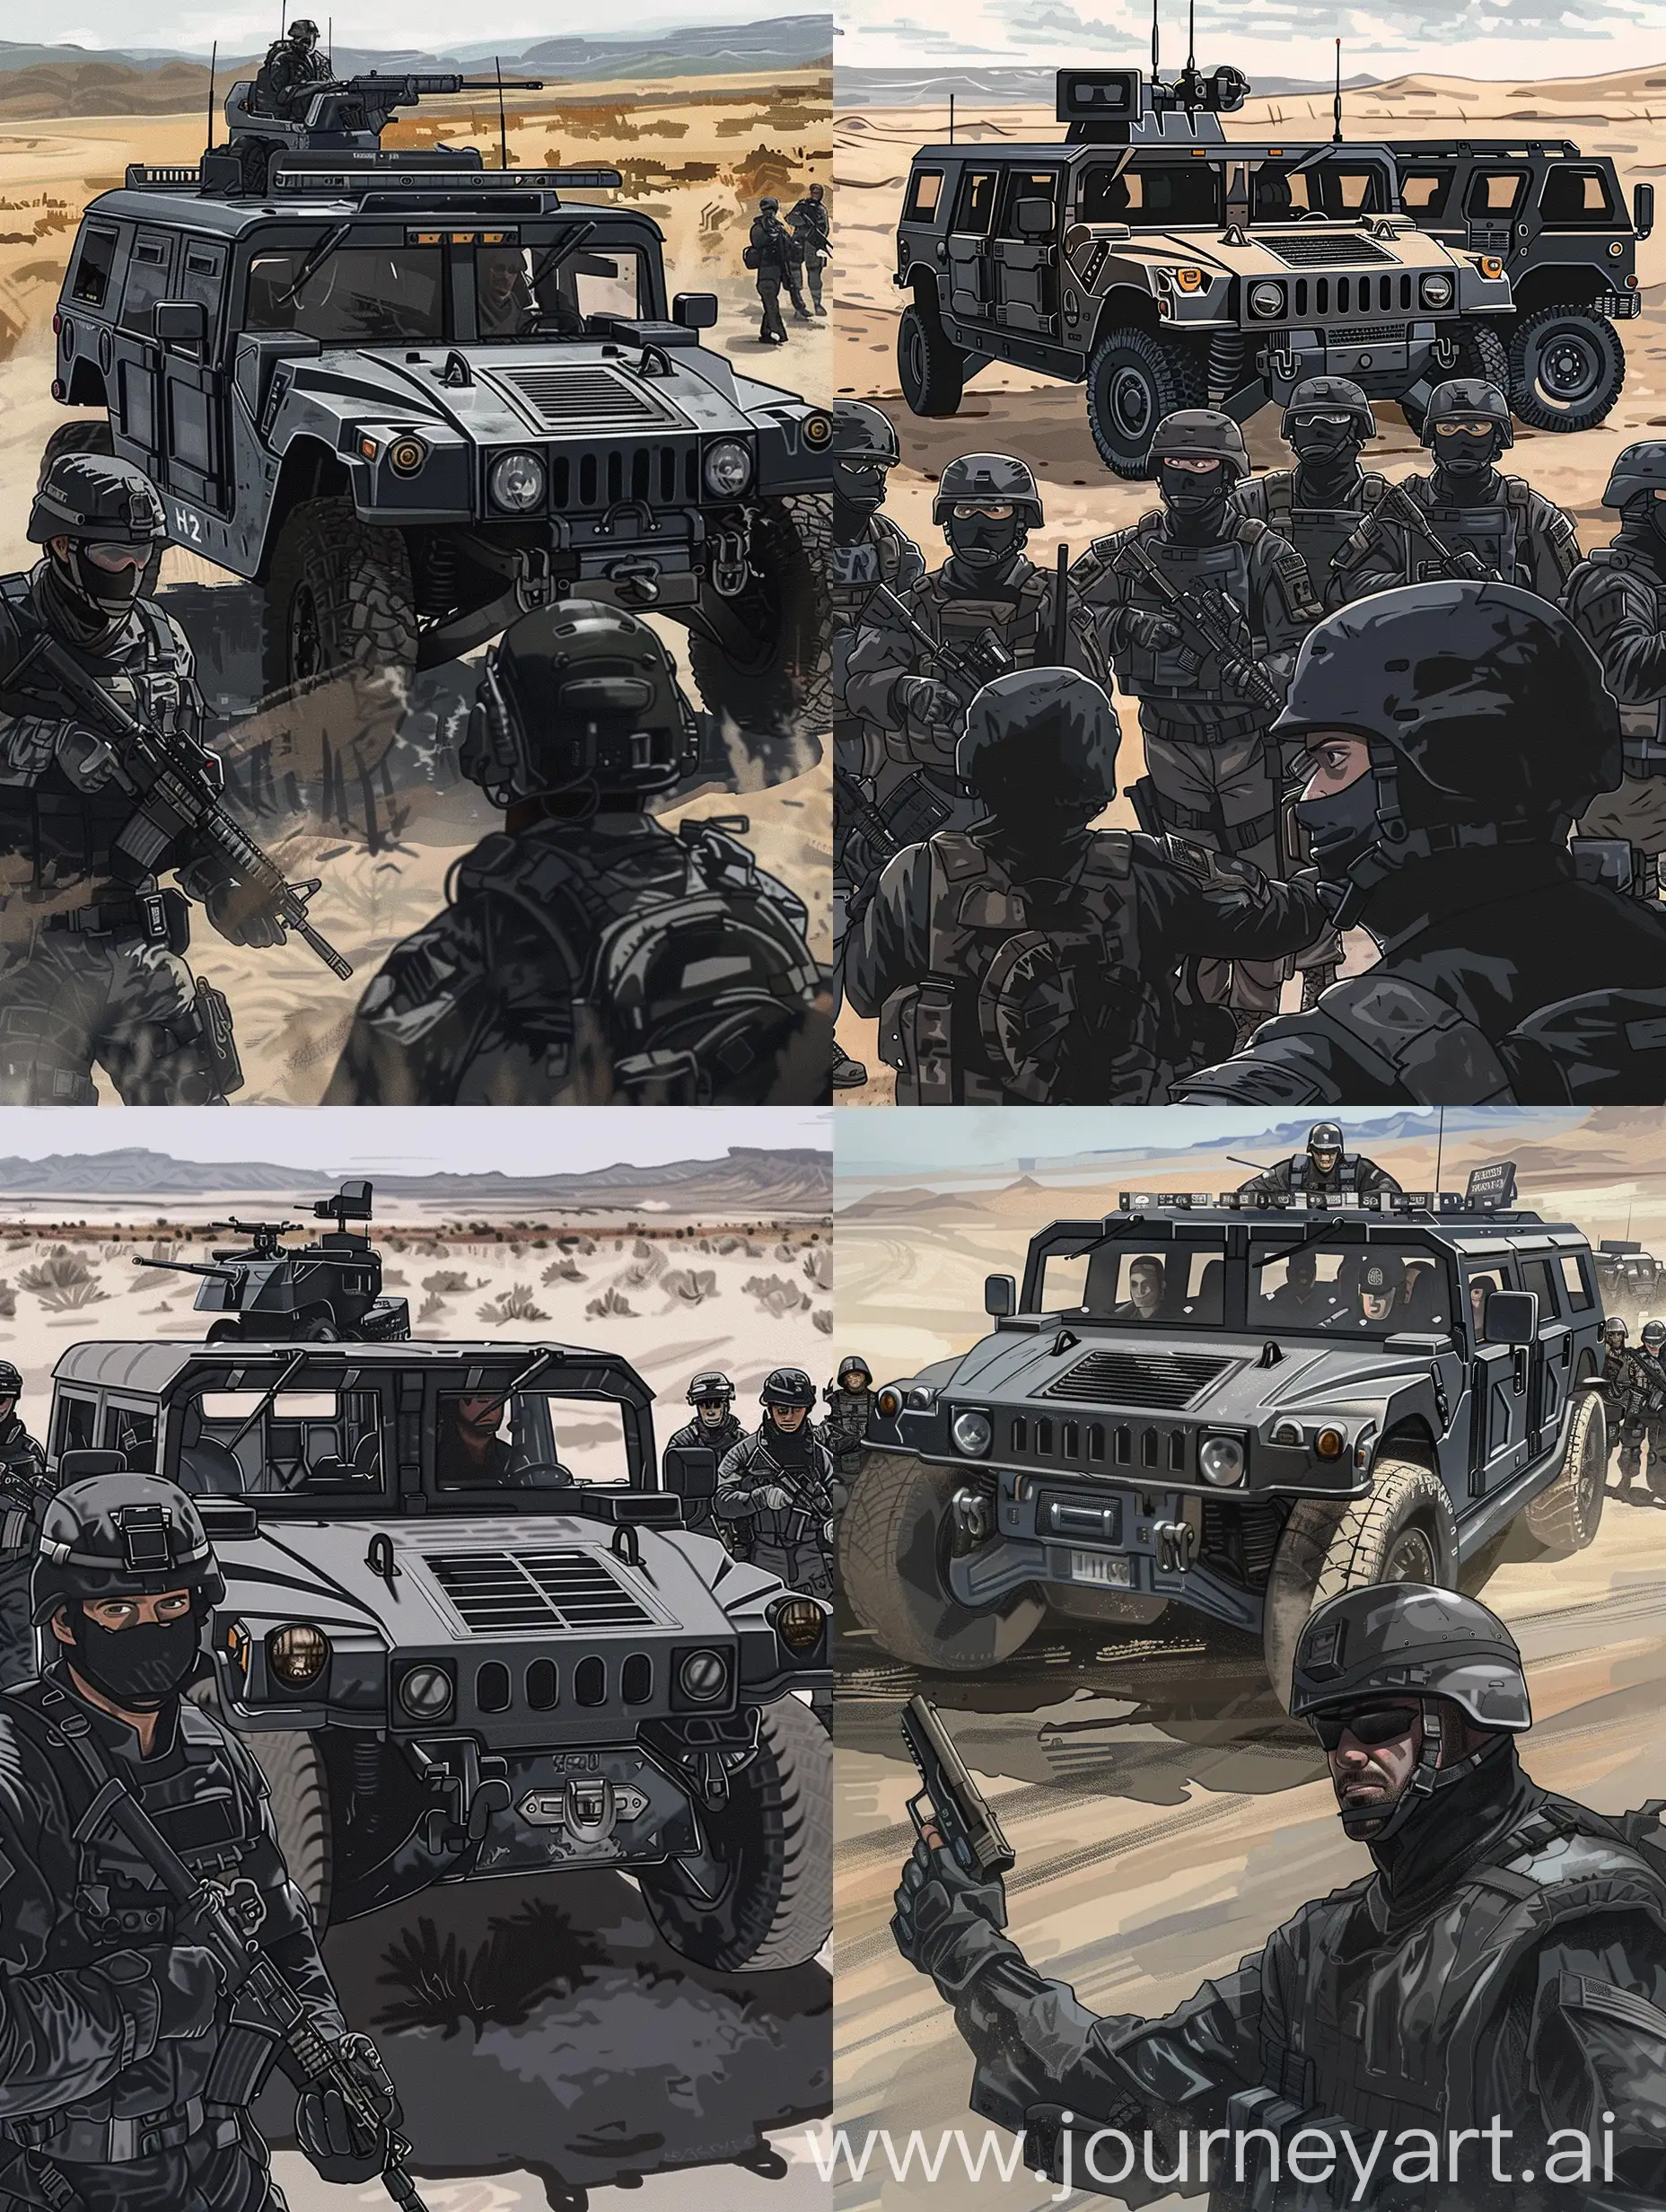 Josh-Duhamel-Leads-BlackClad-Soldiers-with-Military-Vehicle-in-Desert-Scene